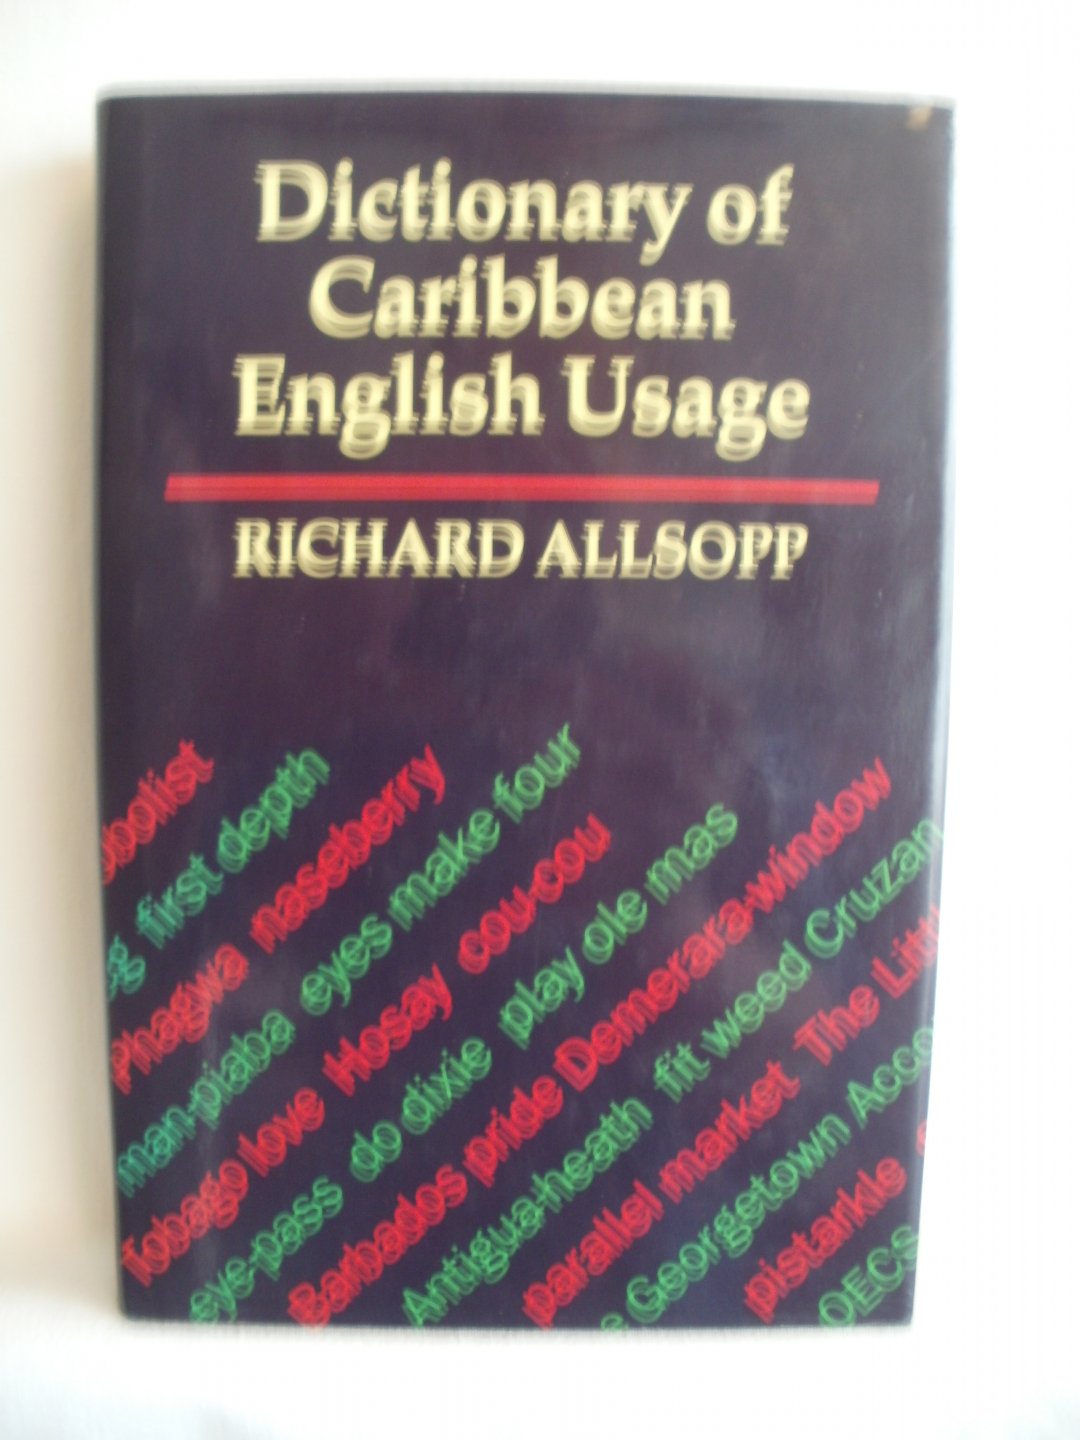 Allsopp, Richard (ed.) - The Dictionary of Caribbean English Usage. With a French and Spanish Supplement.